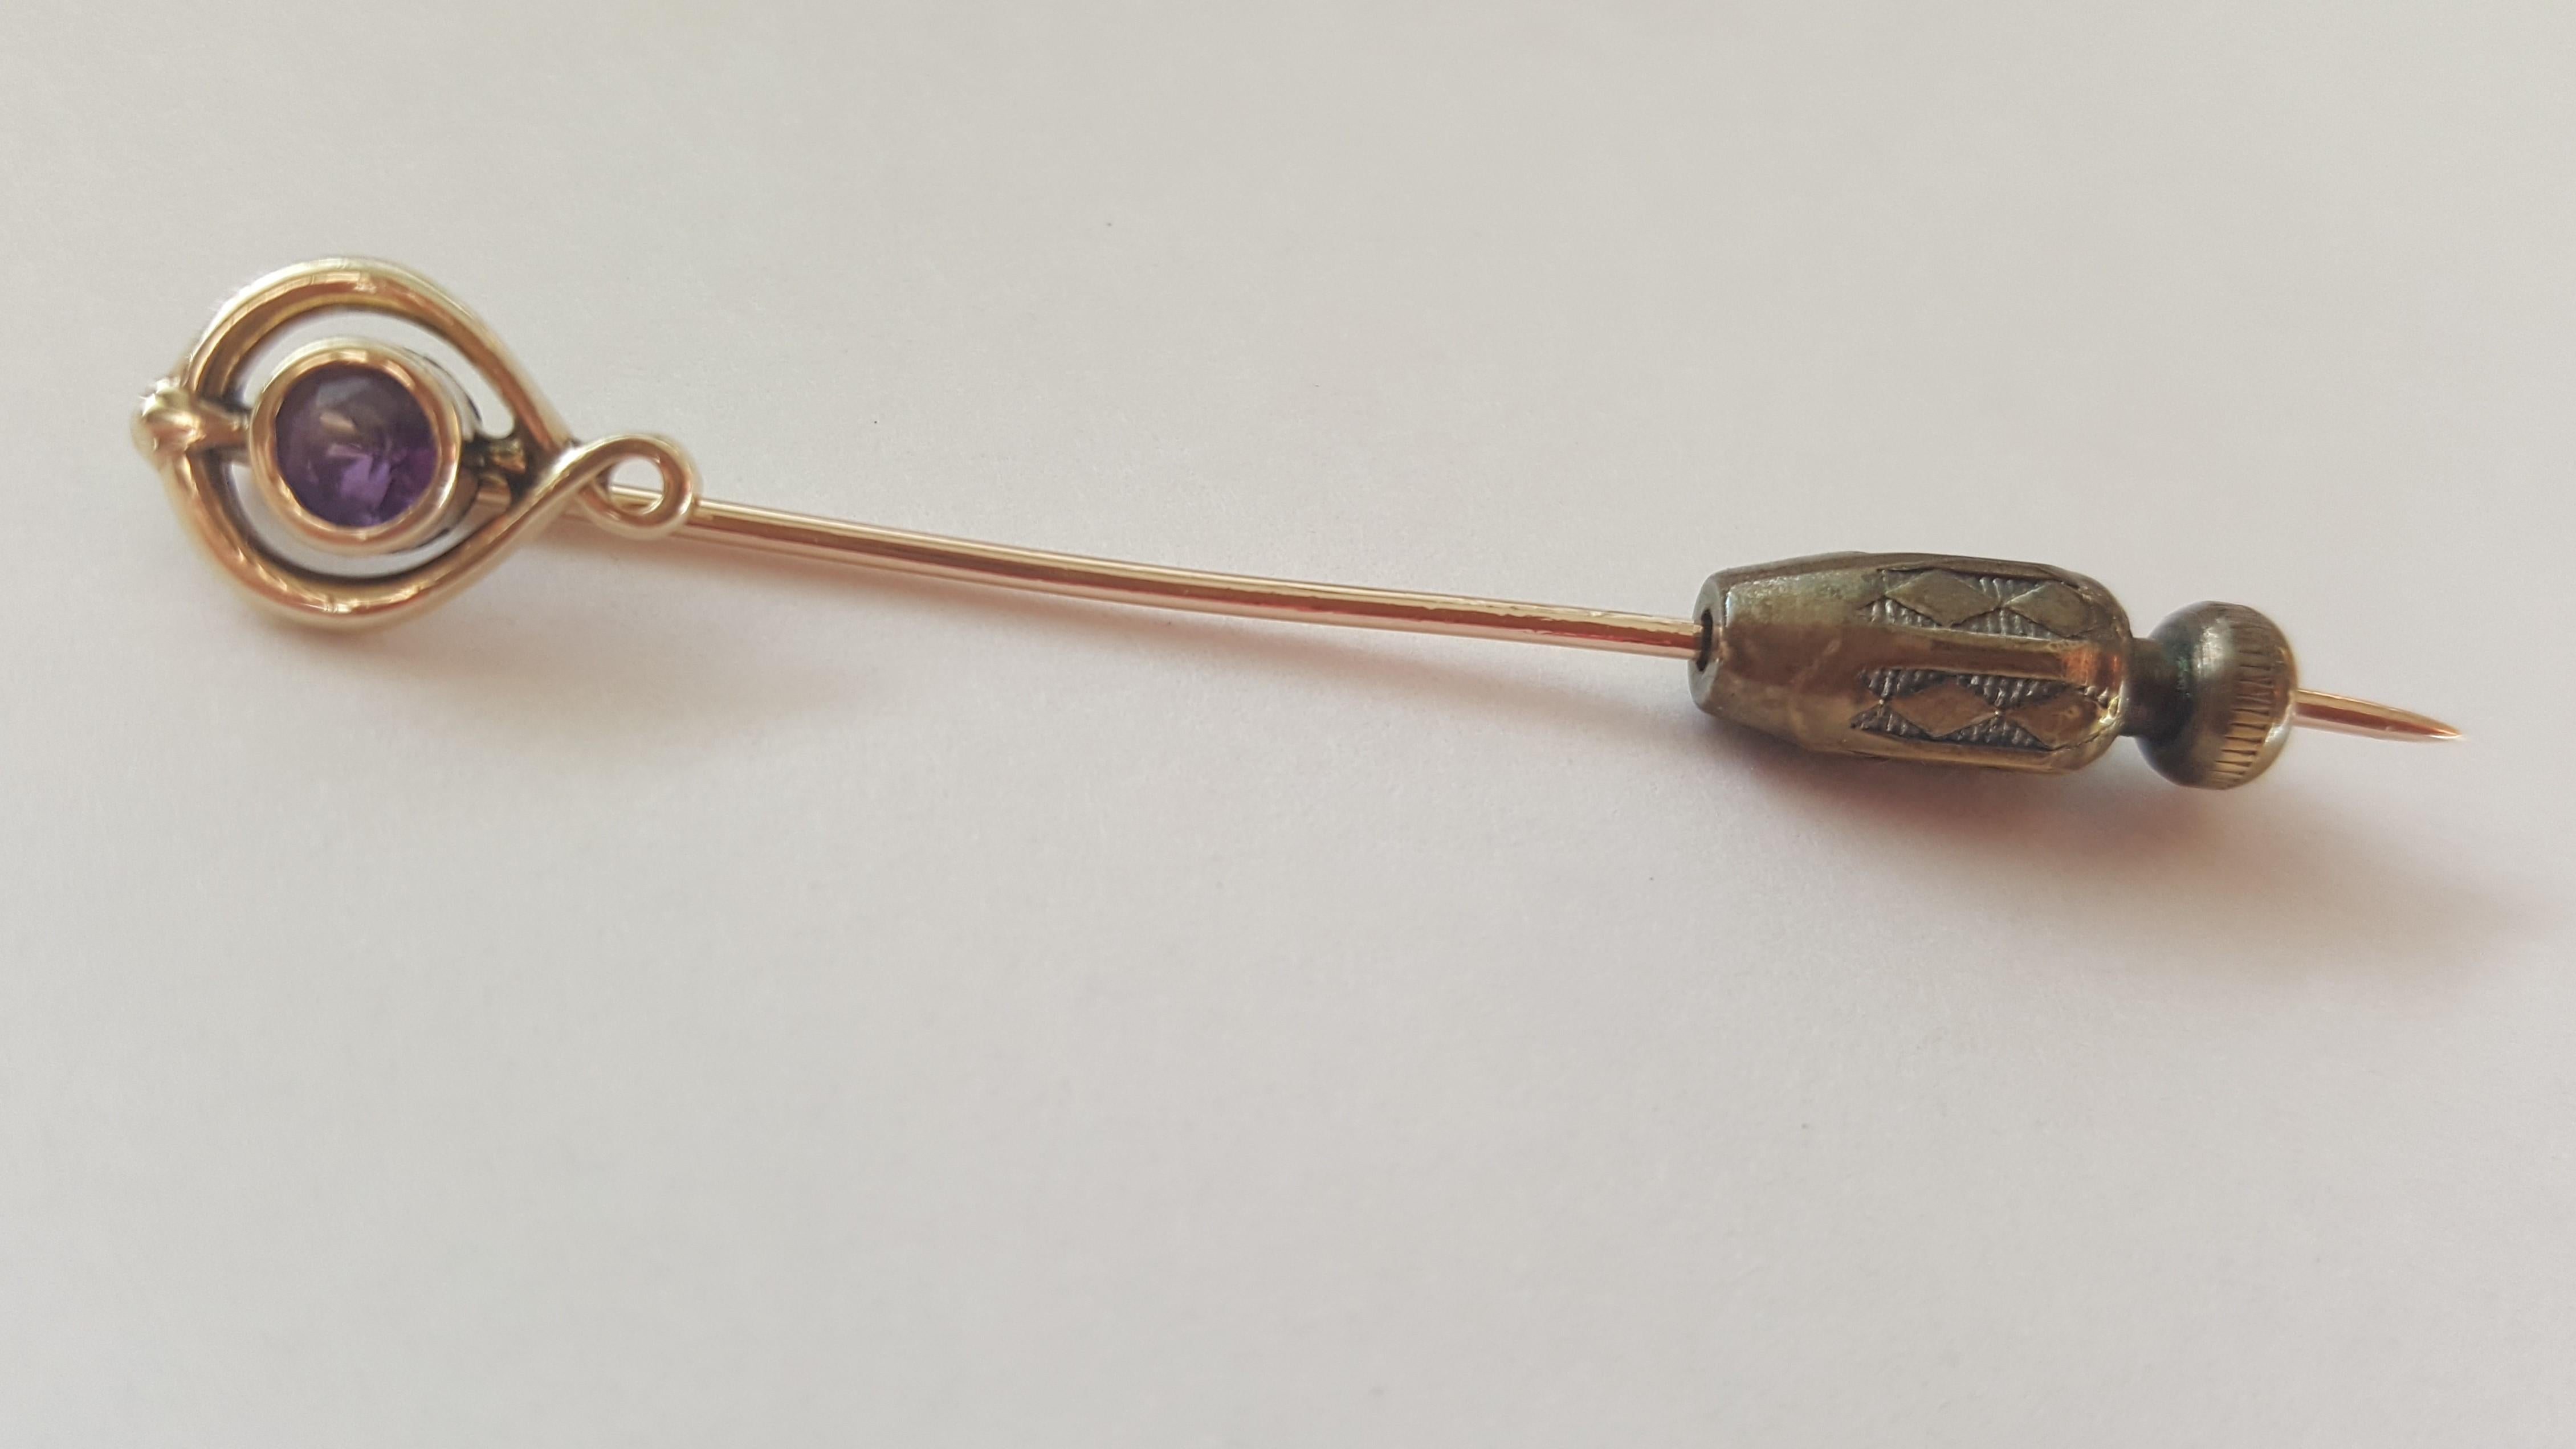 Vintage 10kt yellow gold round bezel-set amethyst stickpin.  The length of the stickpin is 2.25 inches long, weighs 1.1 grams without push-on security (1.6 grams with push-on). The amethyst is bezel set and the diameter of the top of the stickpin is